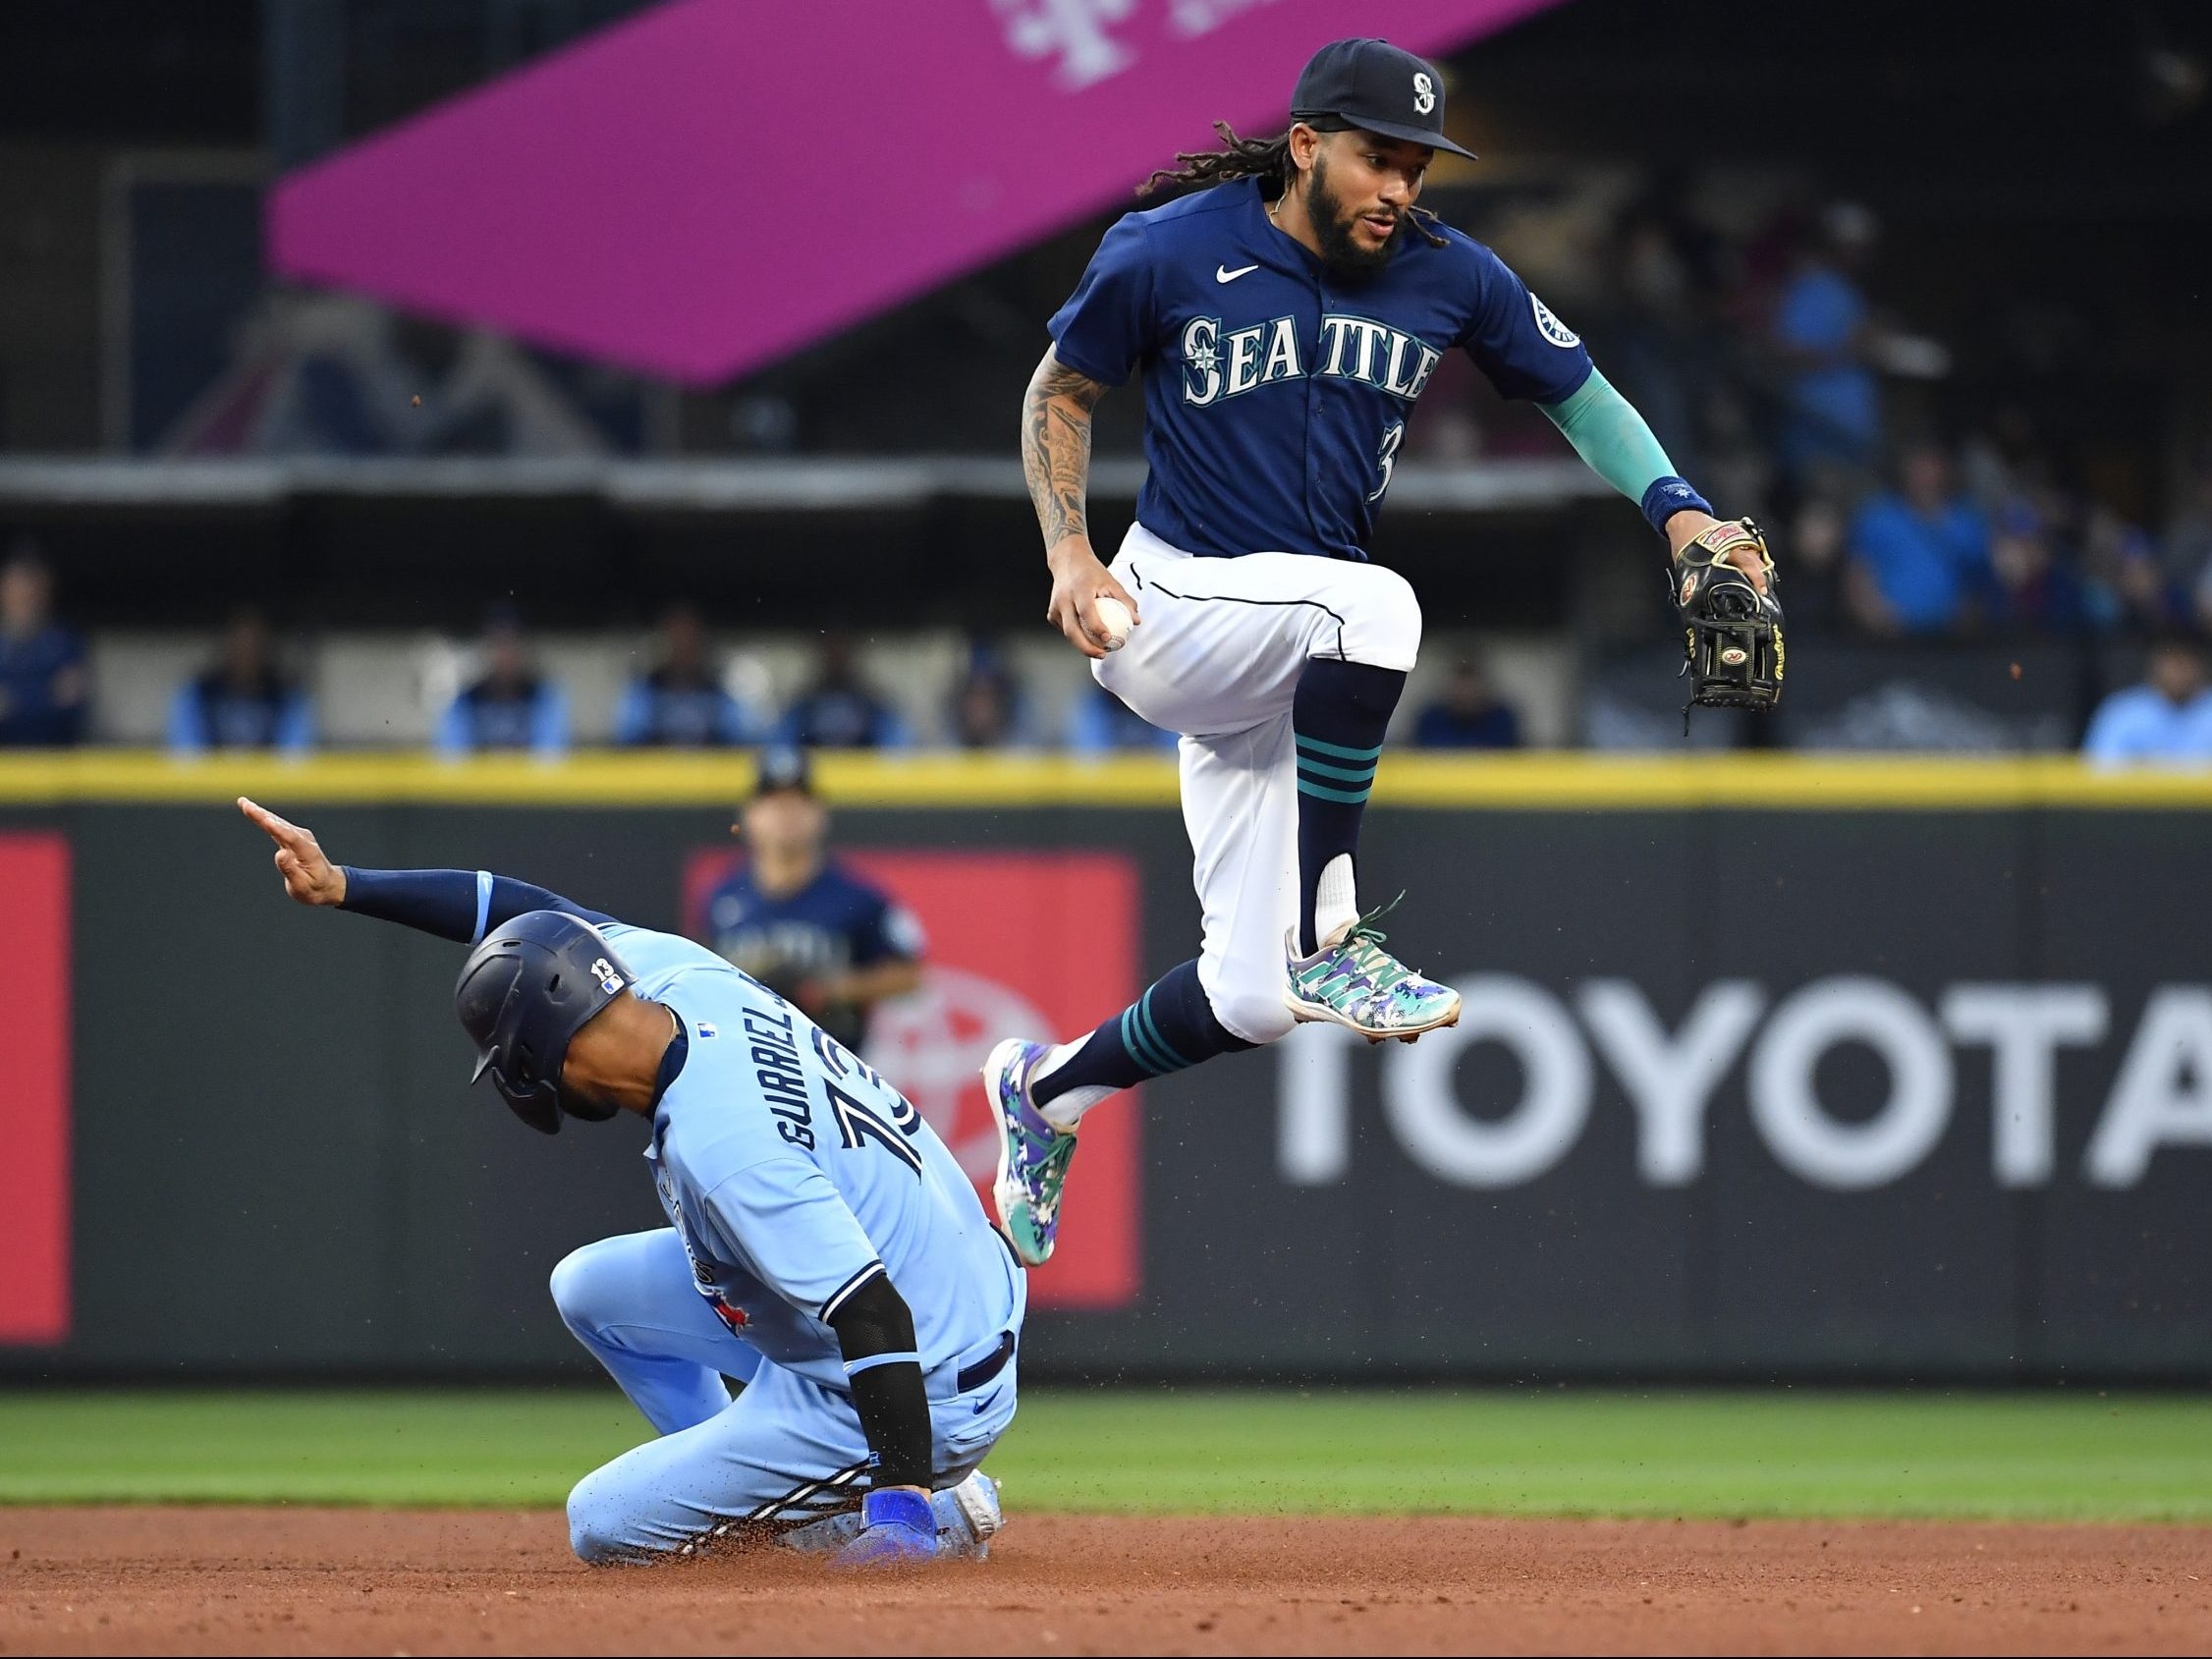 Blue Jays bats nowhere to be seen in loss to Mariners